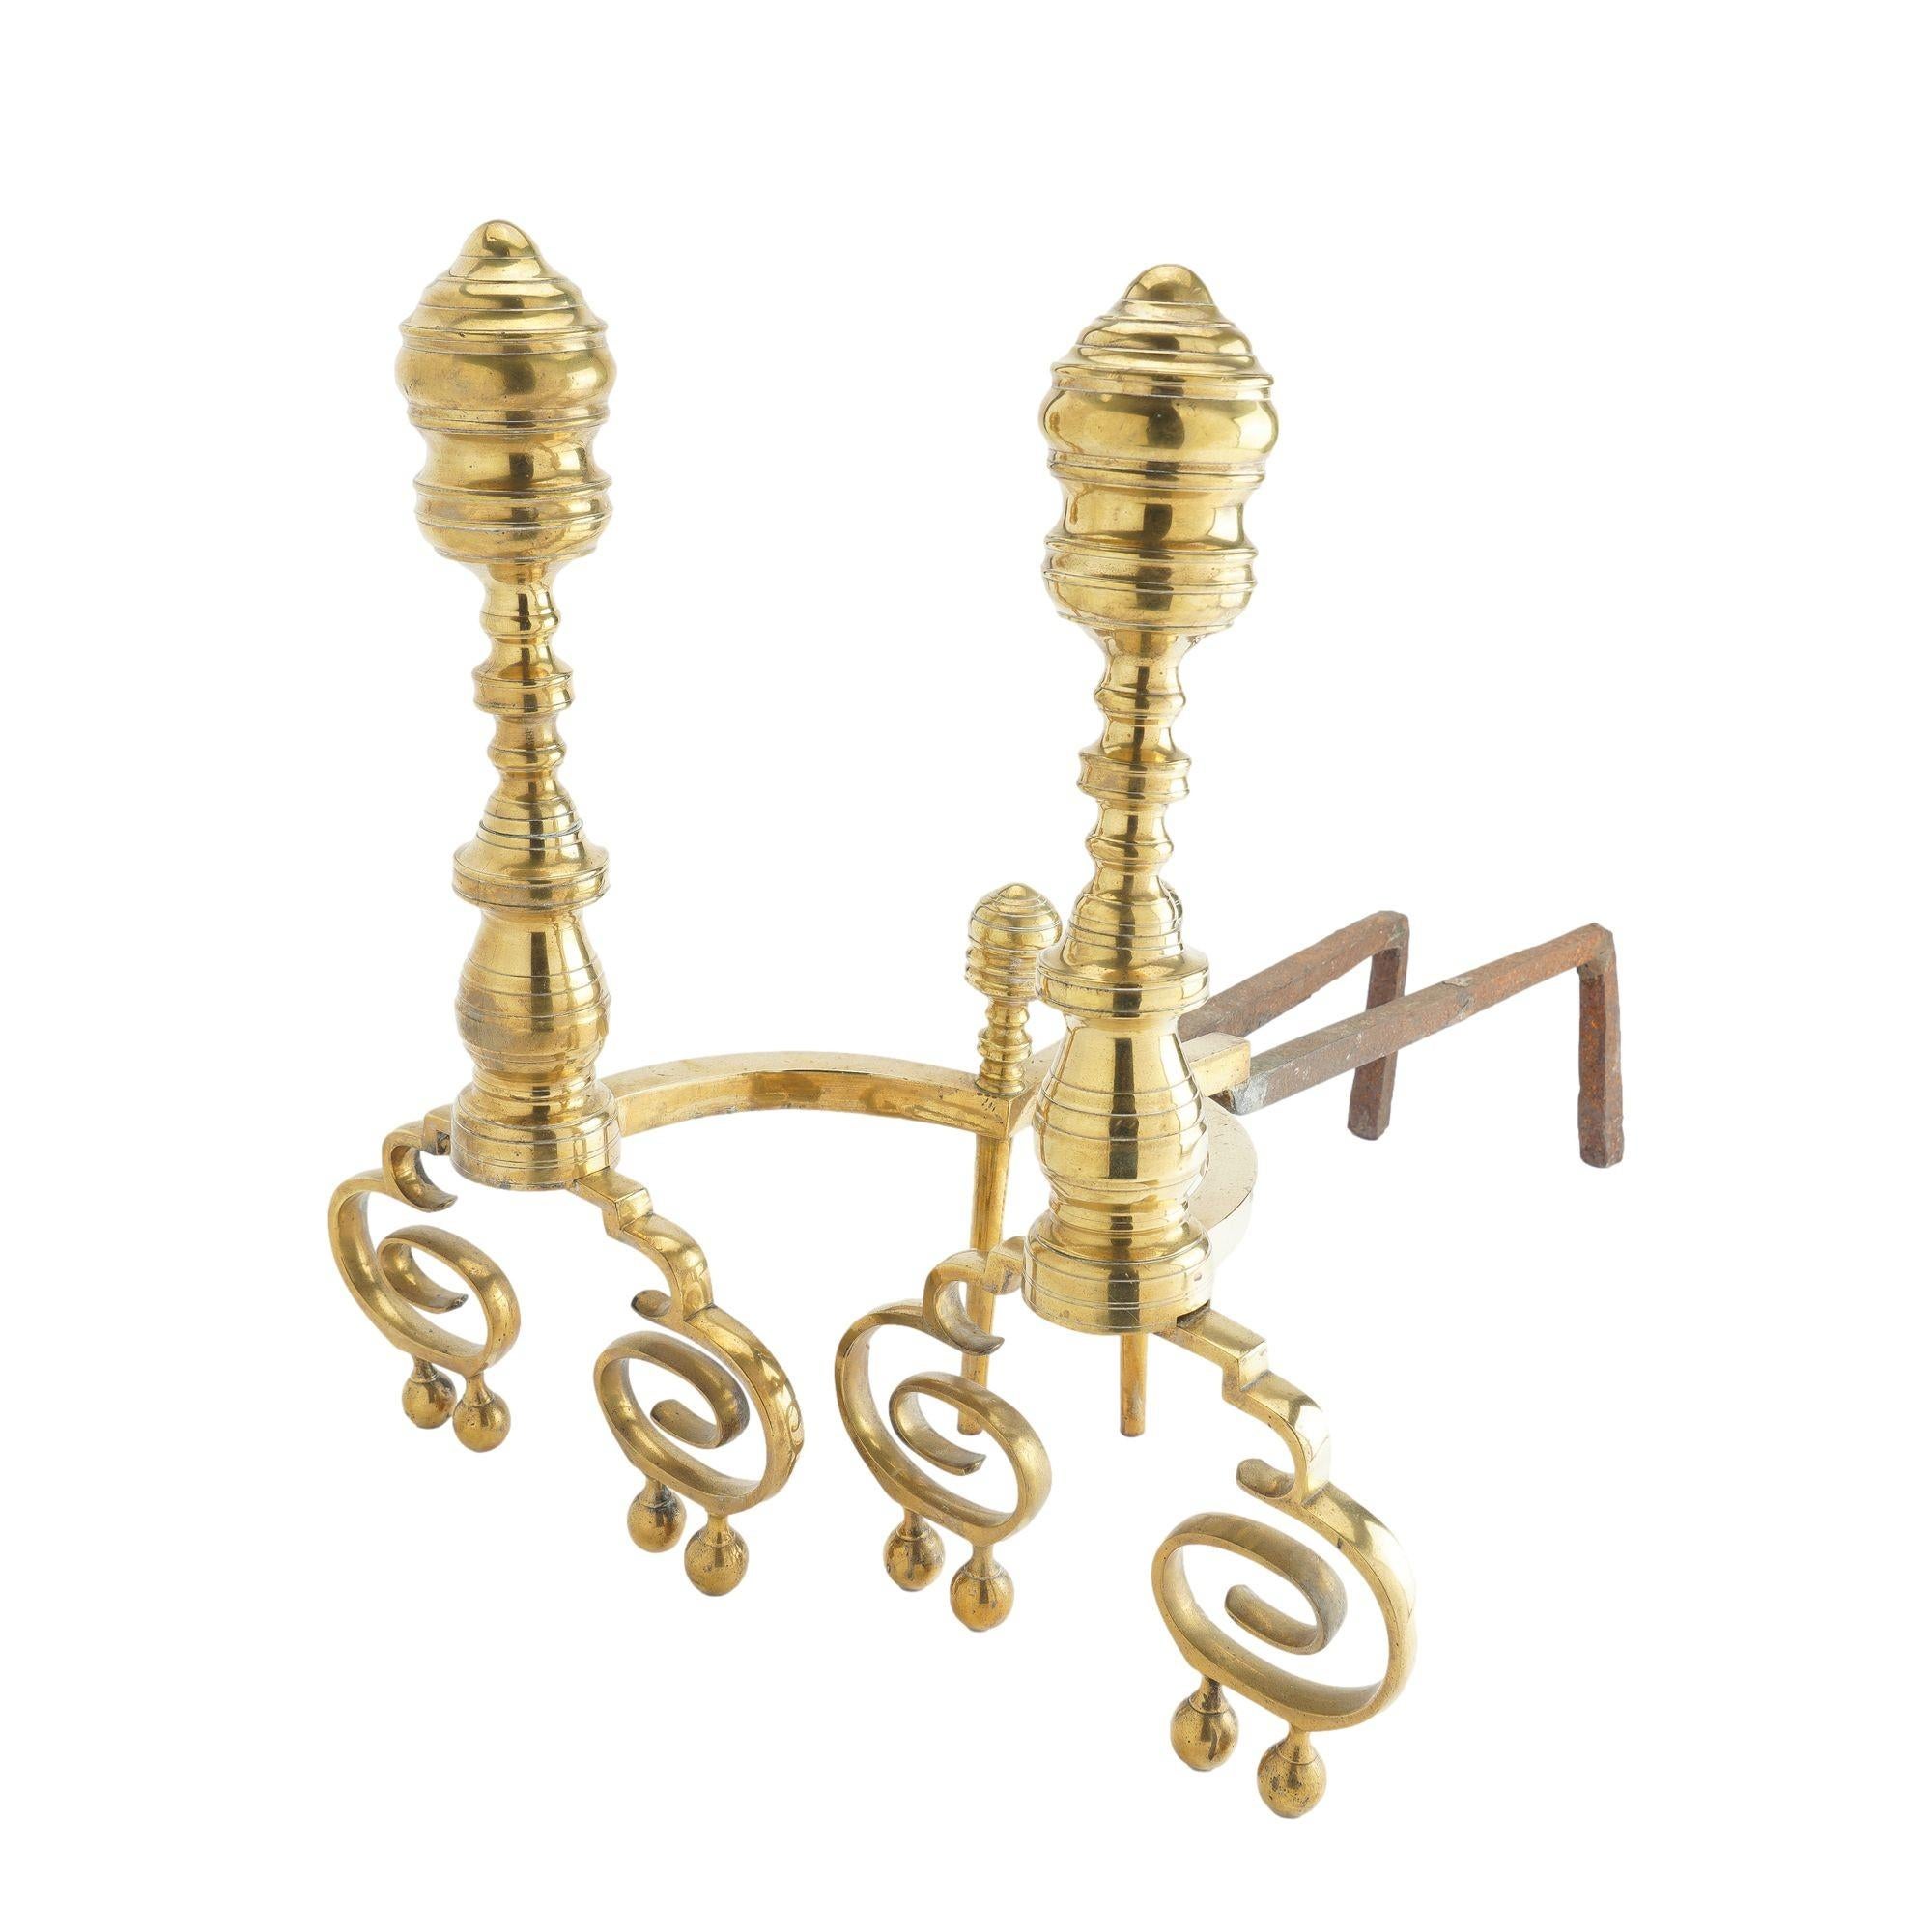 Neoclassical Pair of Philadelphia Neoclassic brass andirons with fire tools, c. 1815-25